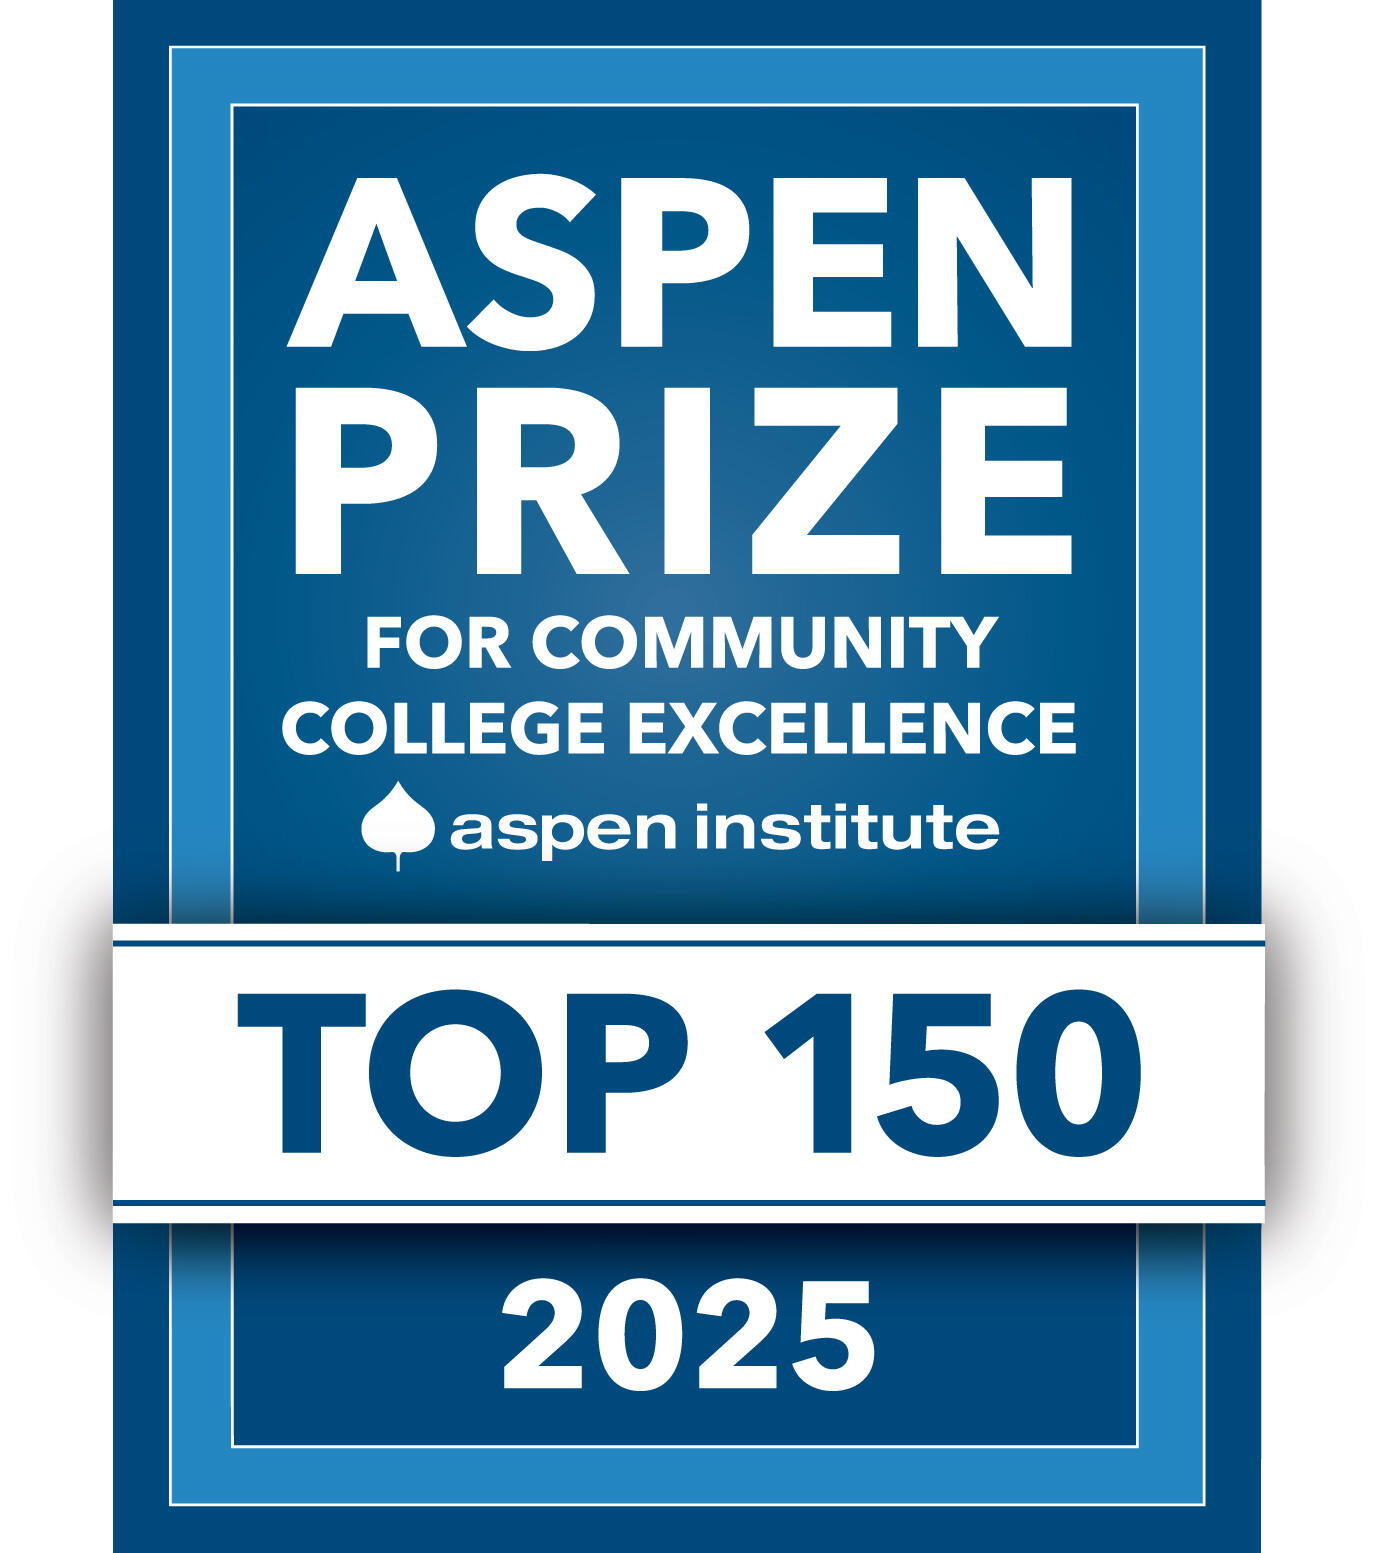 2025 Top 150 ASPEN Prize Logo for community College Excellence